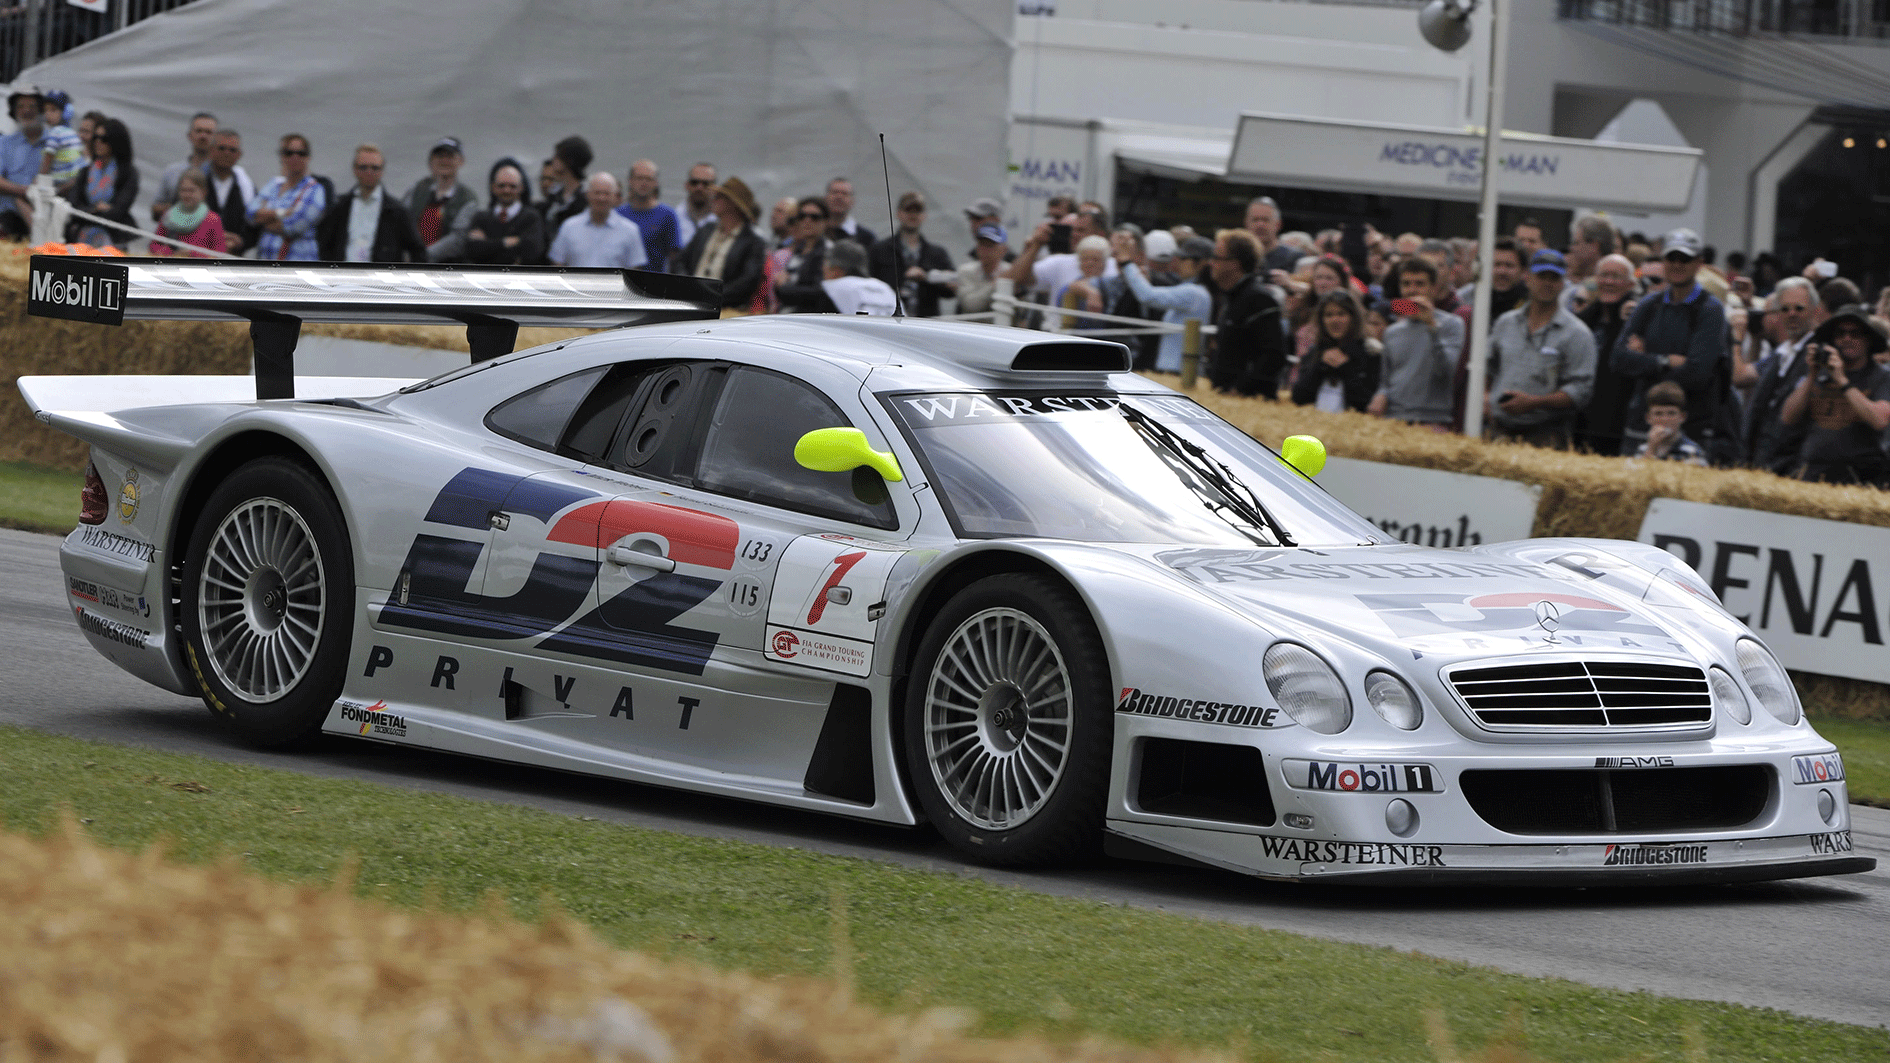 amg, mercedes-amg, mercedes-benz, daimler, singapore, cycle & carriage, clk gtr, clk dtm, mercedes-amg, mercedes, mercedes-benz, motorsports, clk gtr, mercedes-benz amg clk gtr duo could fetch over usd$22m at auction